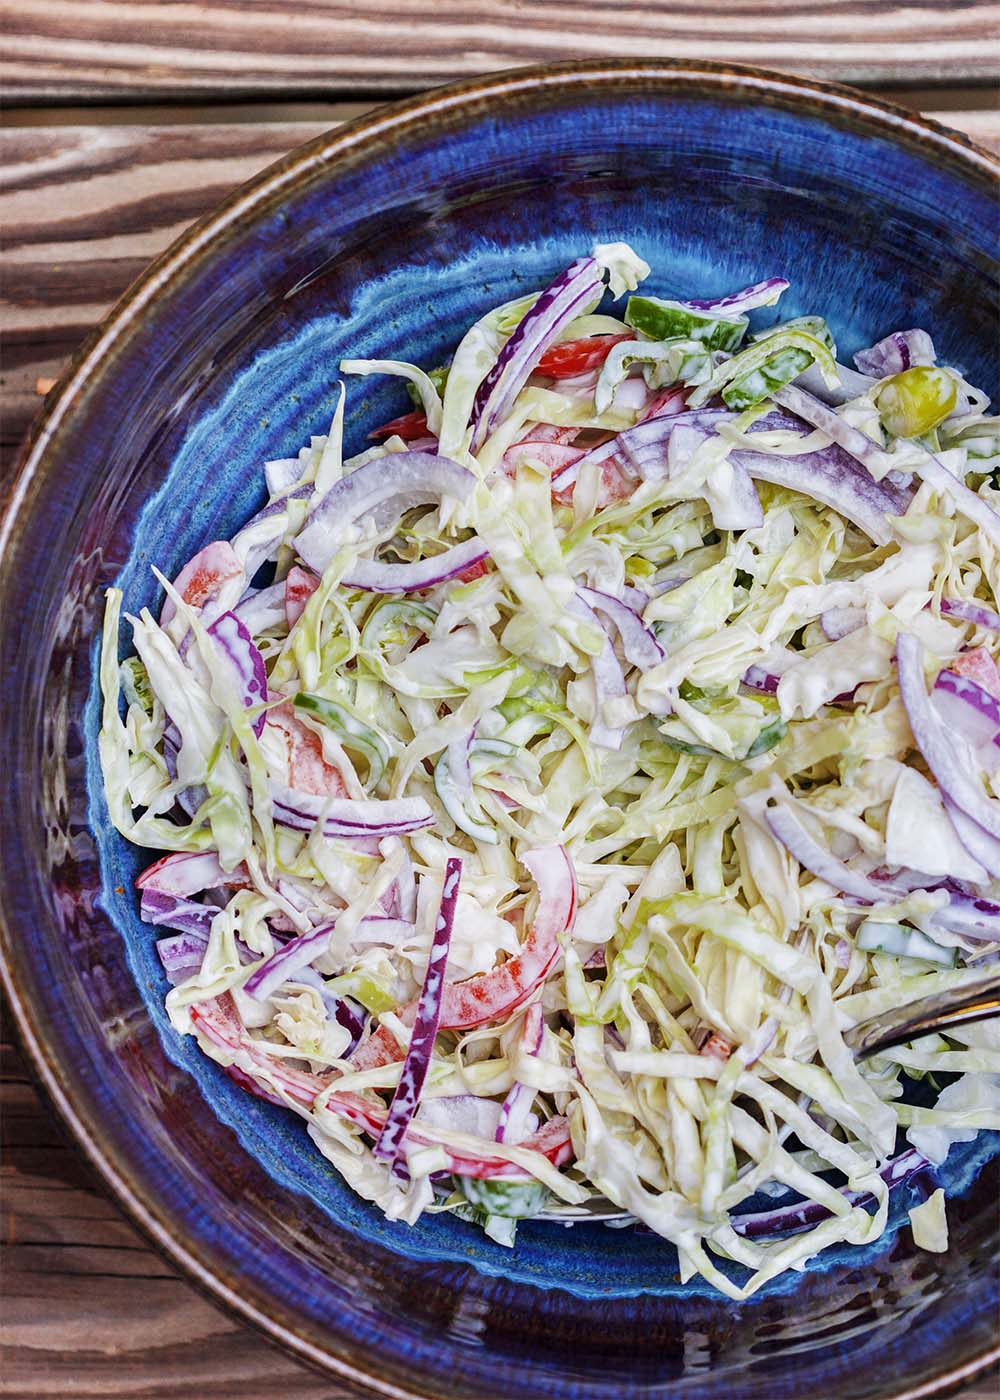 Spicy Jalapeno and Lime Coleslaw - This creamy, spicy coleslaw has a bit of a kick and is a great side dish to bring to a bbq or have on taco night. | justalittlebitofbacon.com